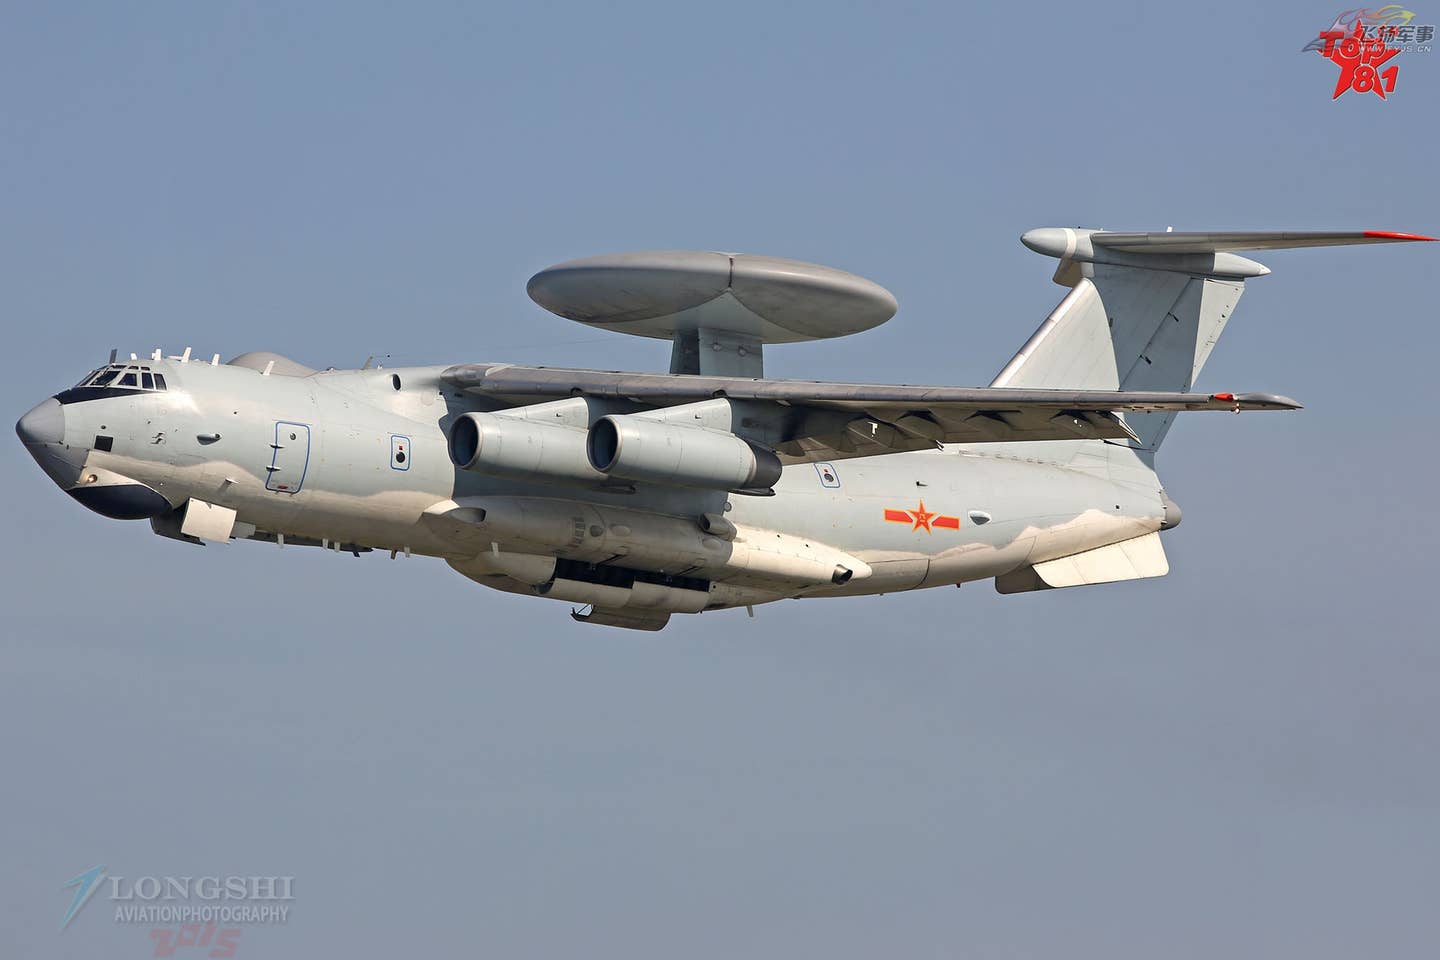 China’s inability to procure more Il-76 airframes for conversion to KJ-2000s has provided added impetus to other AEW&amp;C programs, namely the KJ-200 and KJ-500. <em>Longshi/via Chinese internet</em>